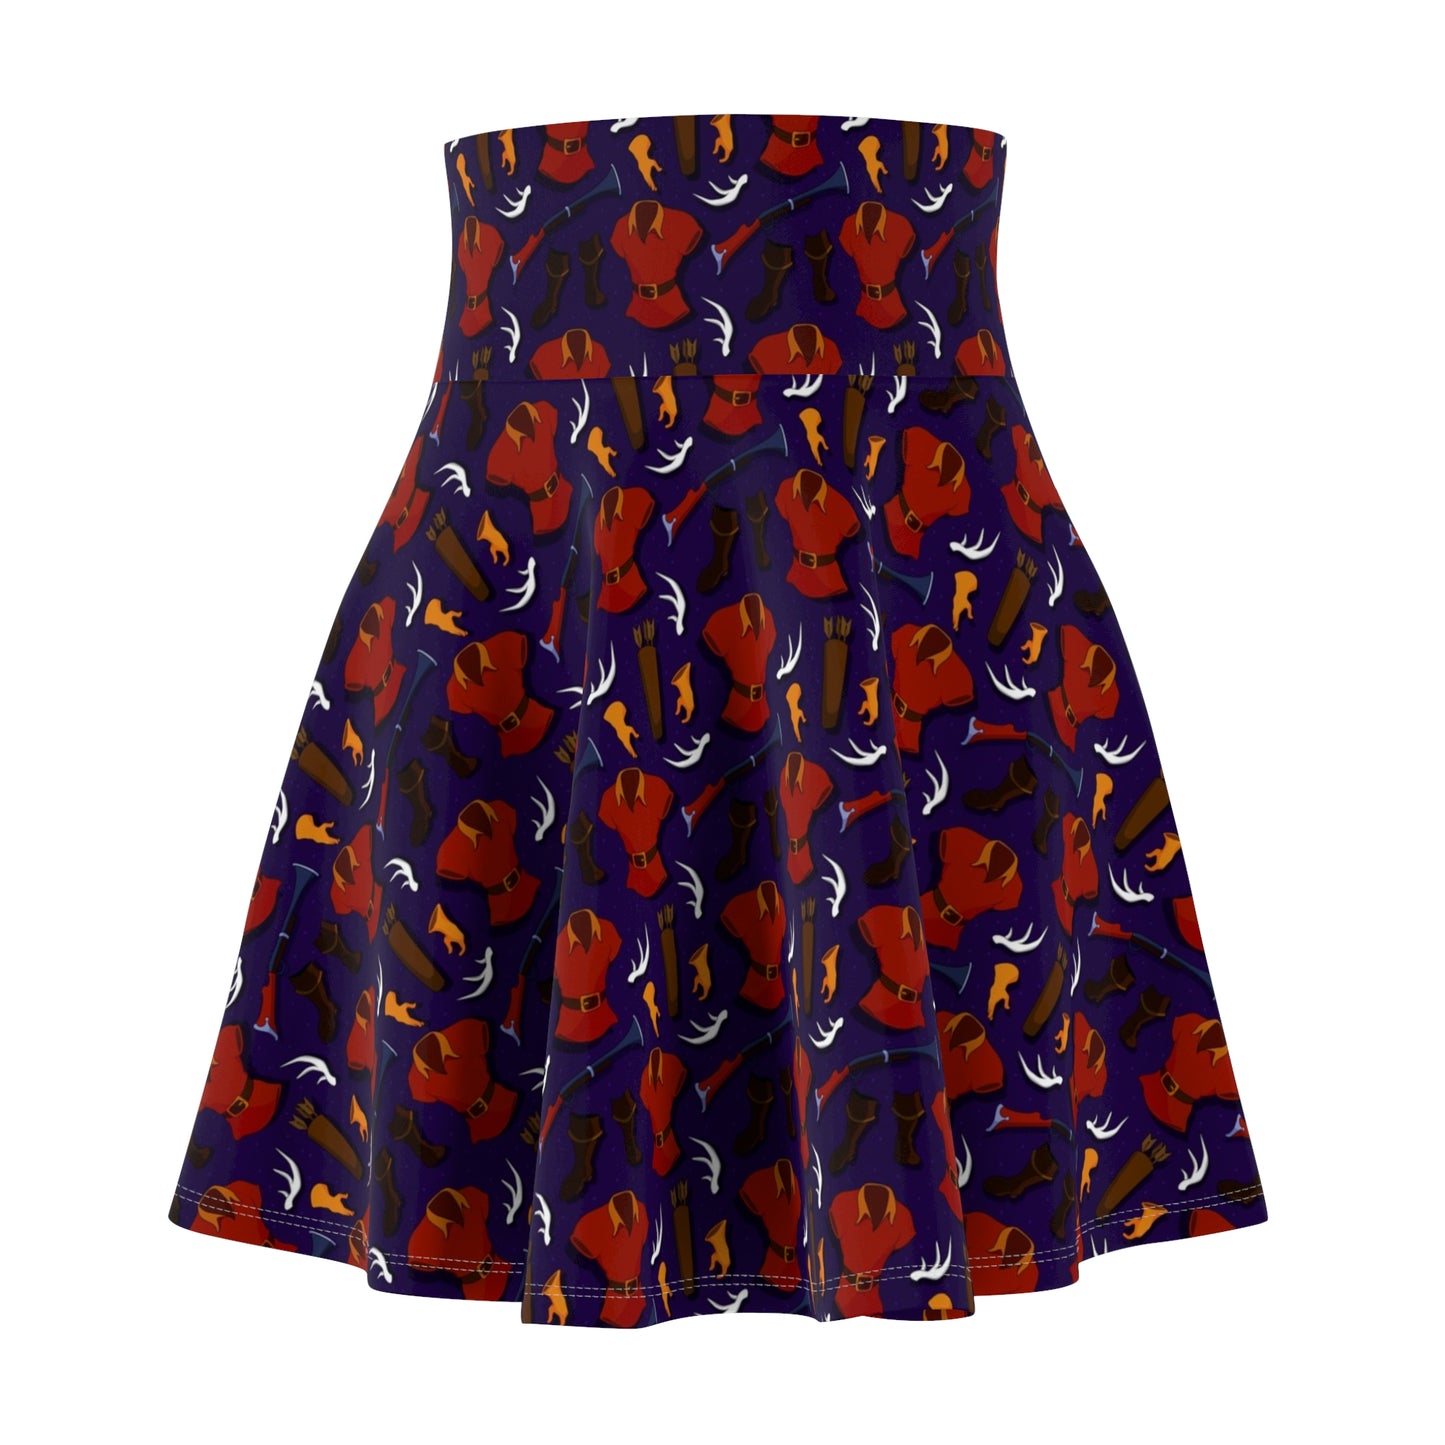 No Man In Town Half As Manly Women's Skater Skirt